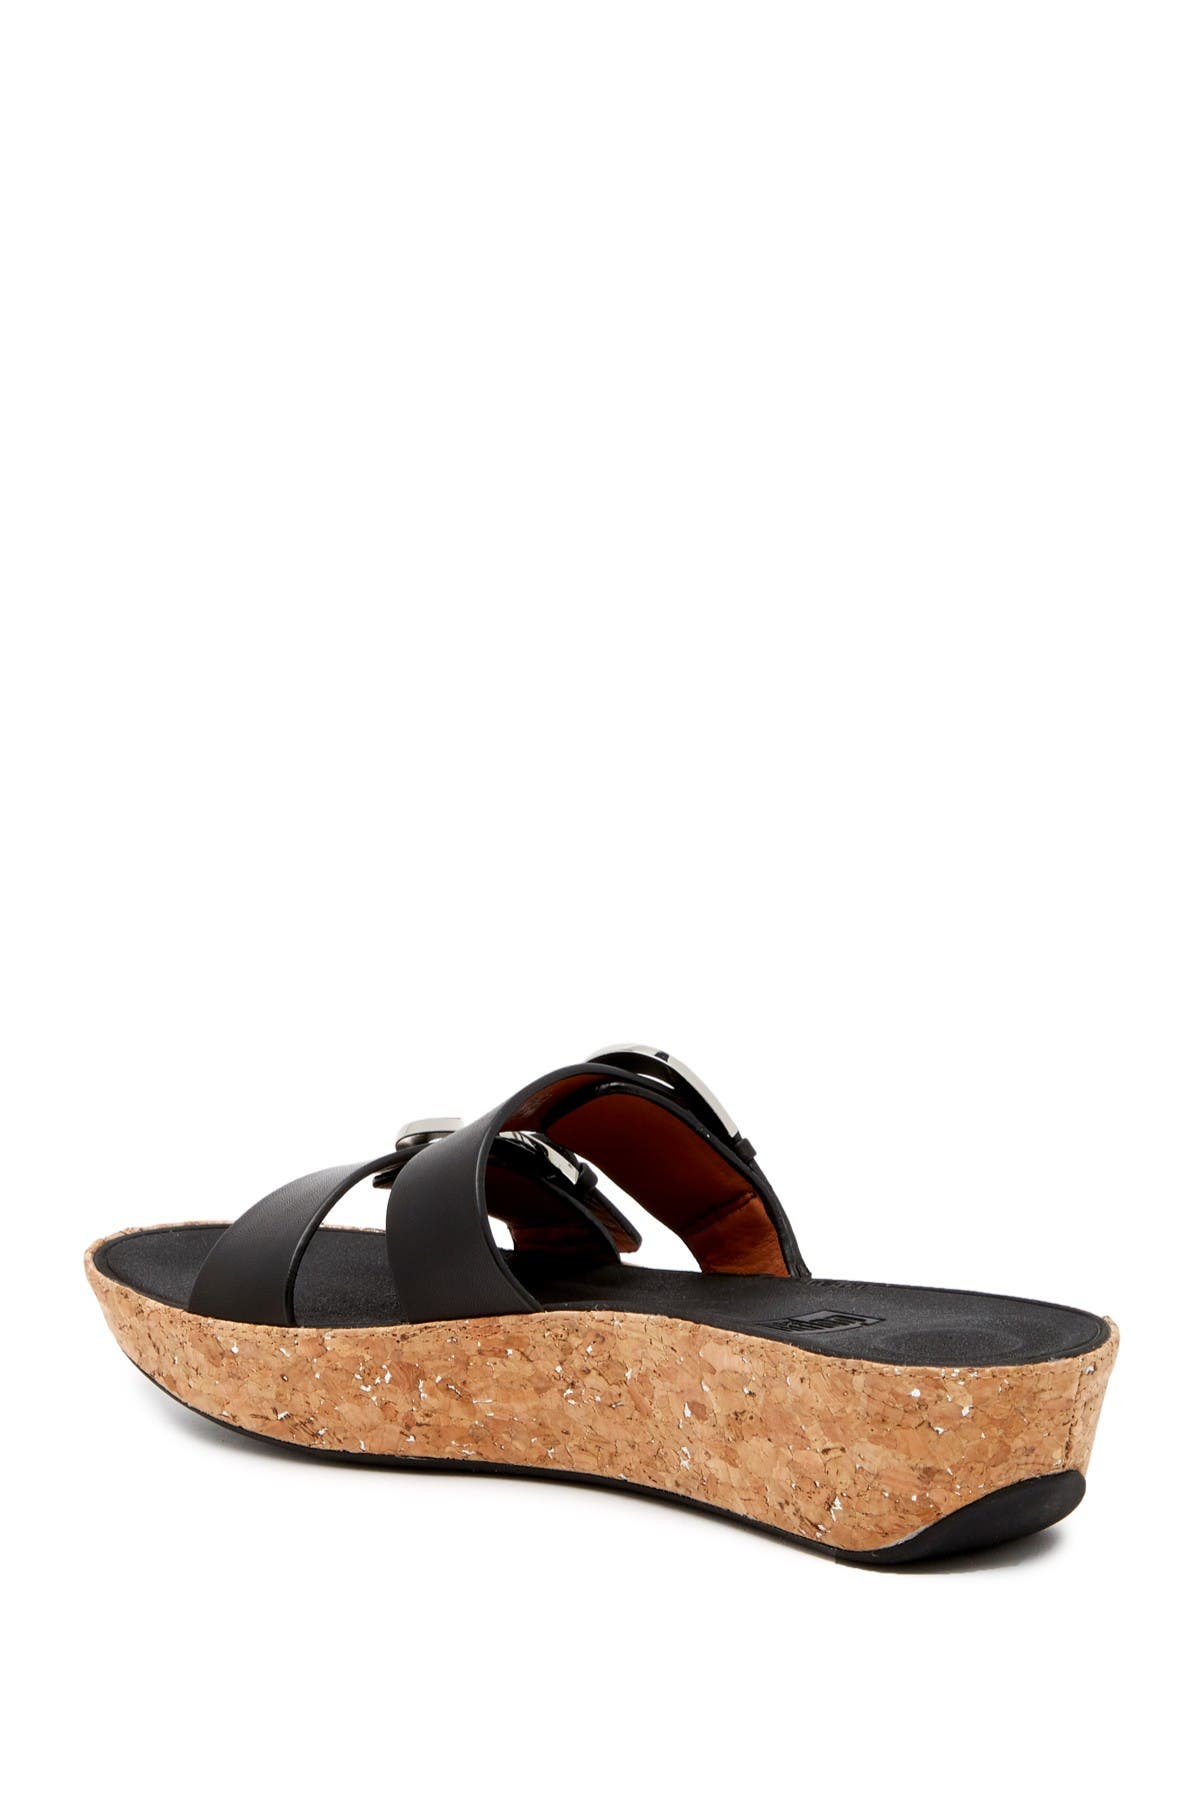 fitflop duo buckle slide sandals